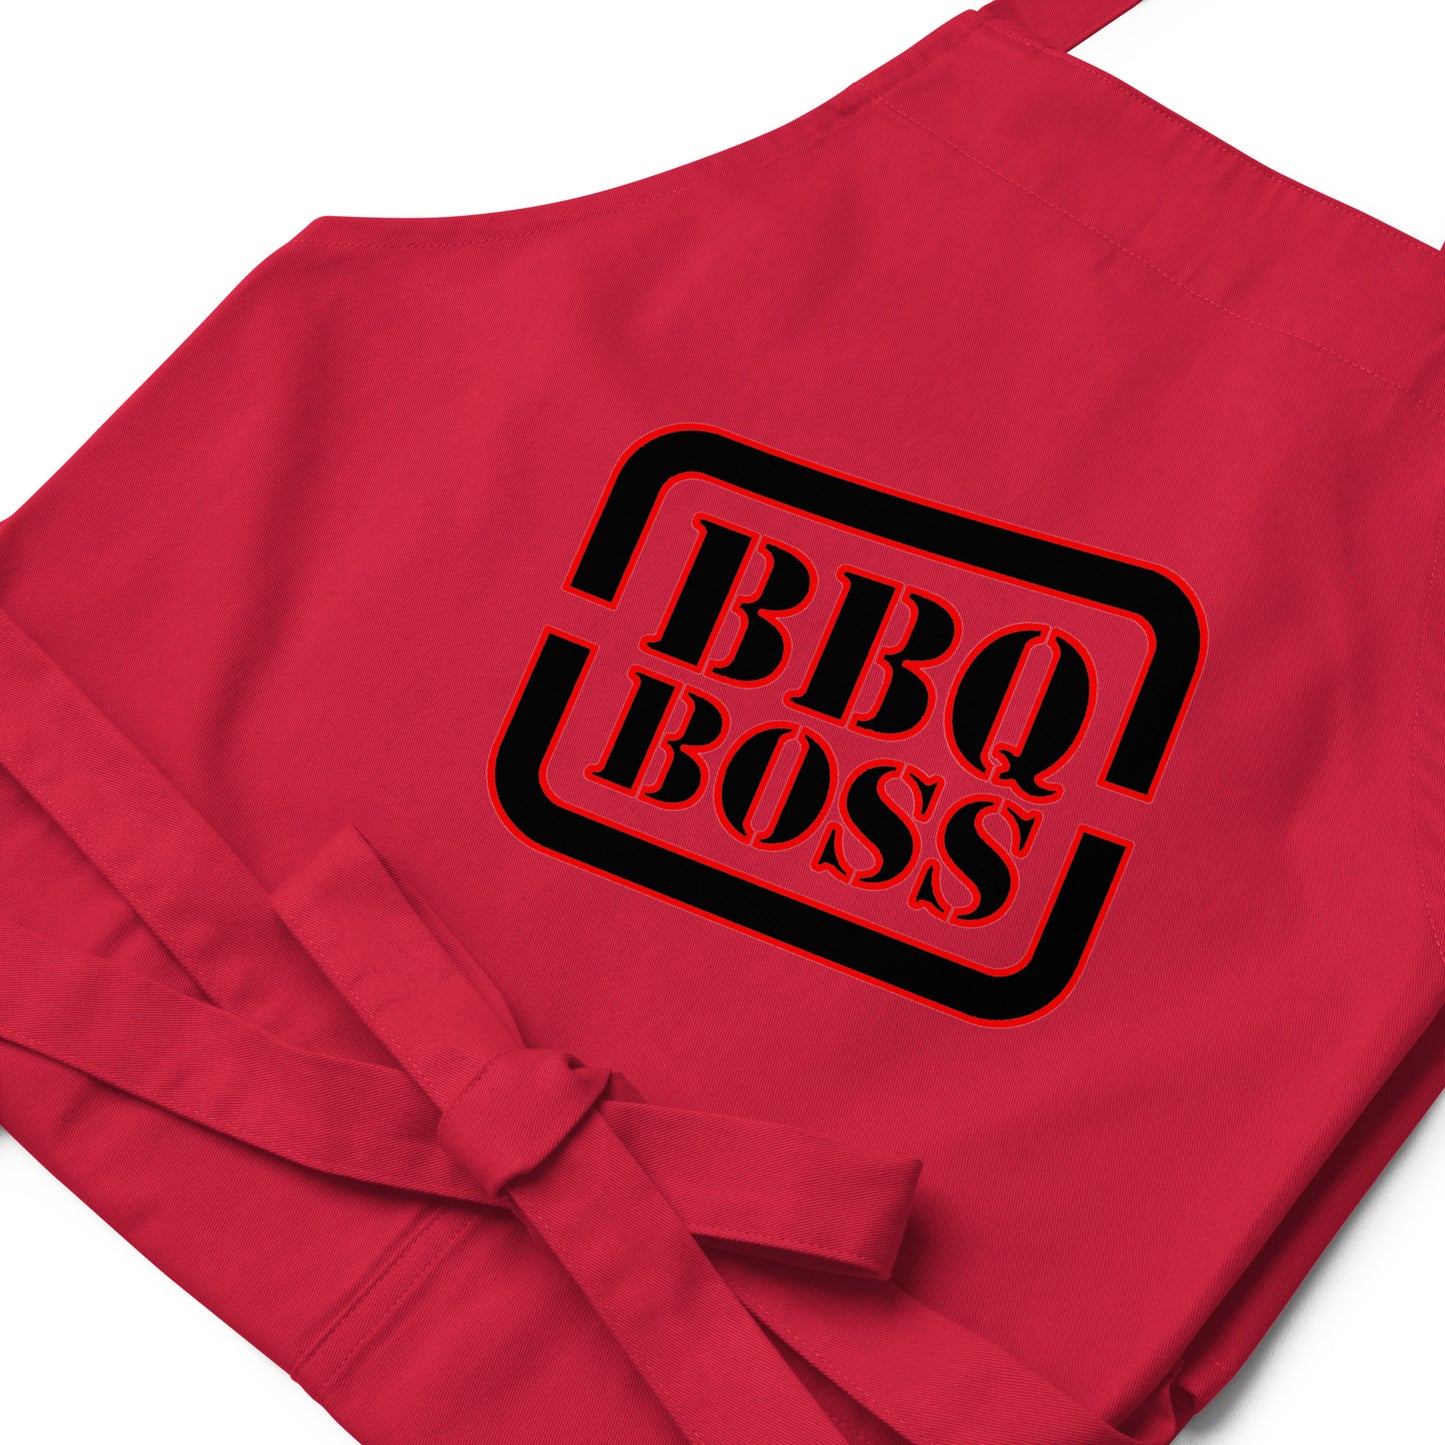 red apron with text "BBQ BOSS"